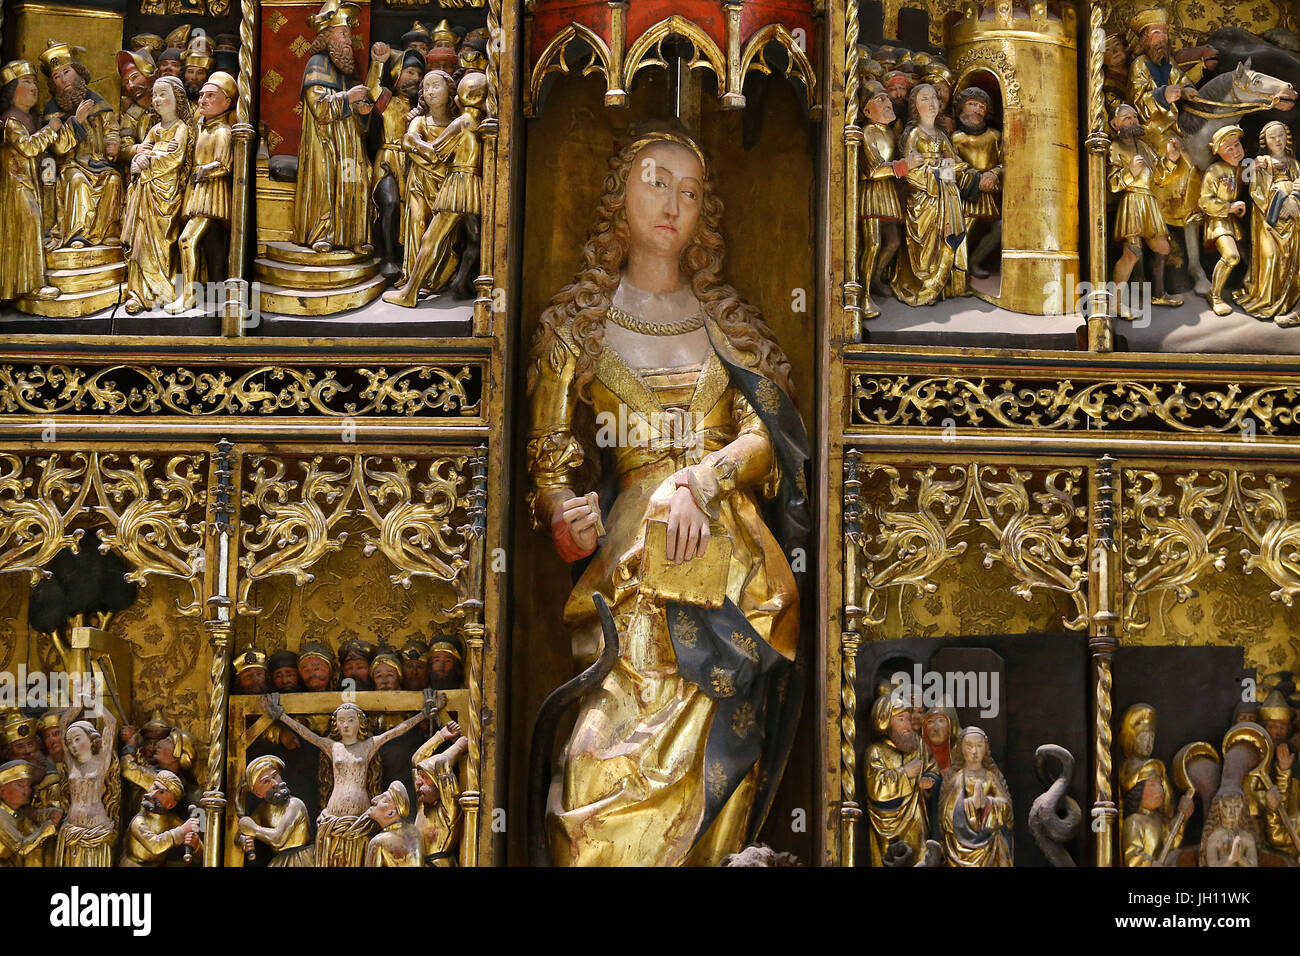 The Victoria and Albert Museum. The St Margaret altarpiece. About 1520. Germany. Oak, painted and gilded. United kingdom. Stock Photo